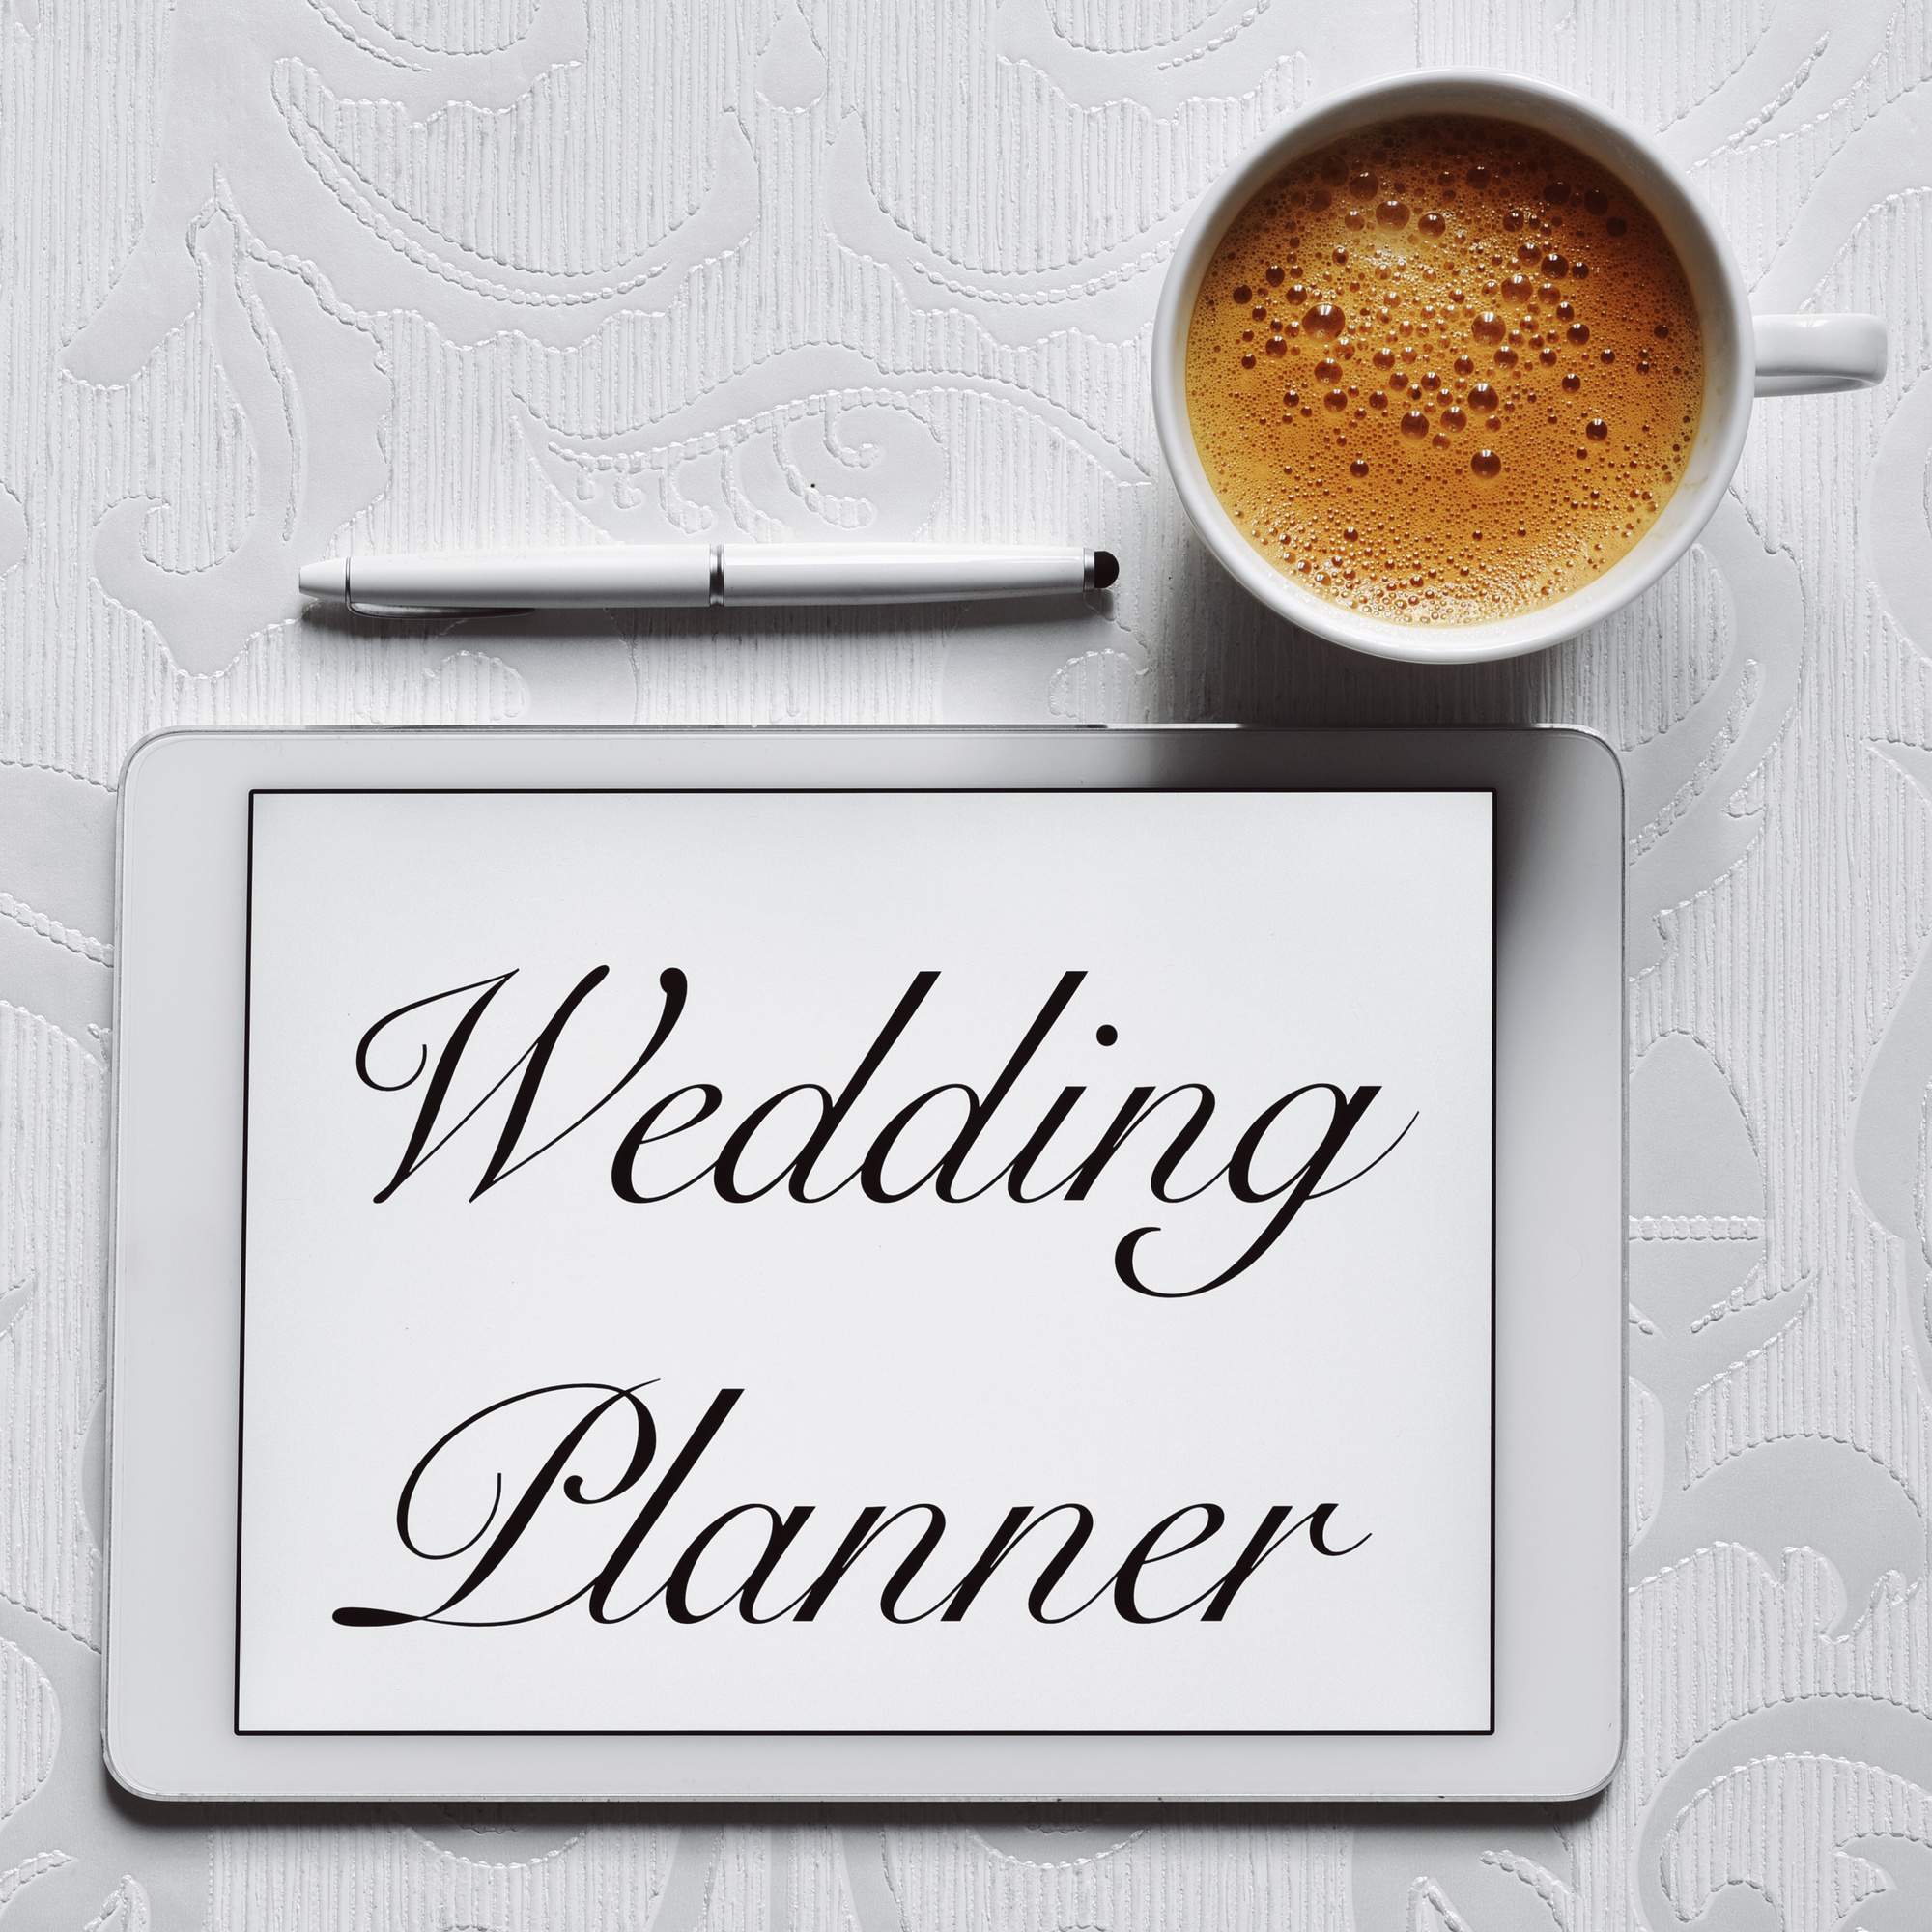 3 Reasons To Hire a Wedding Planner